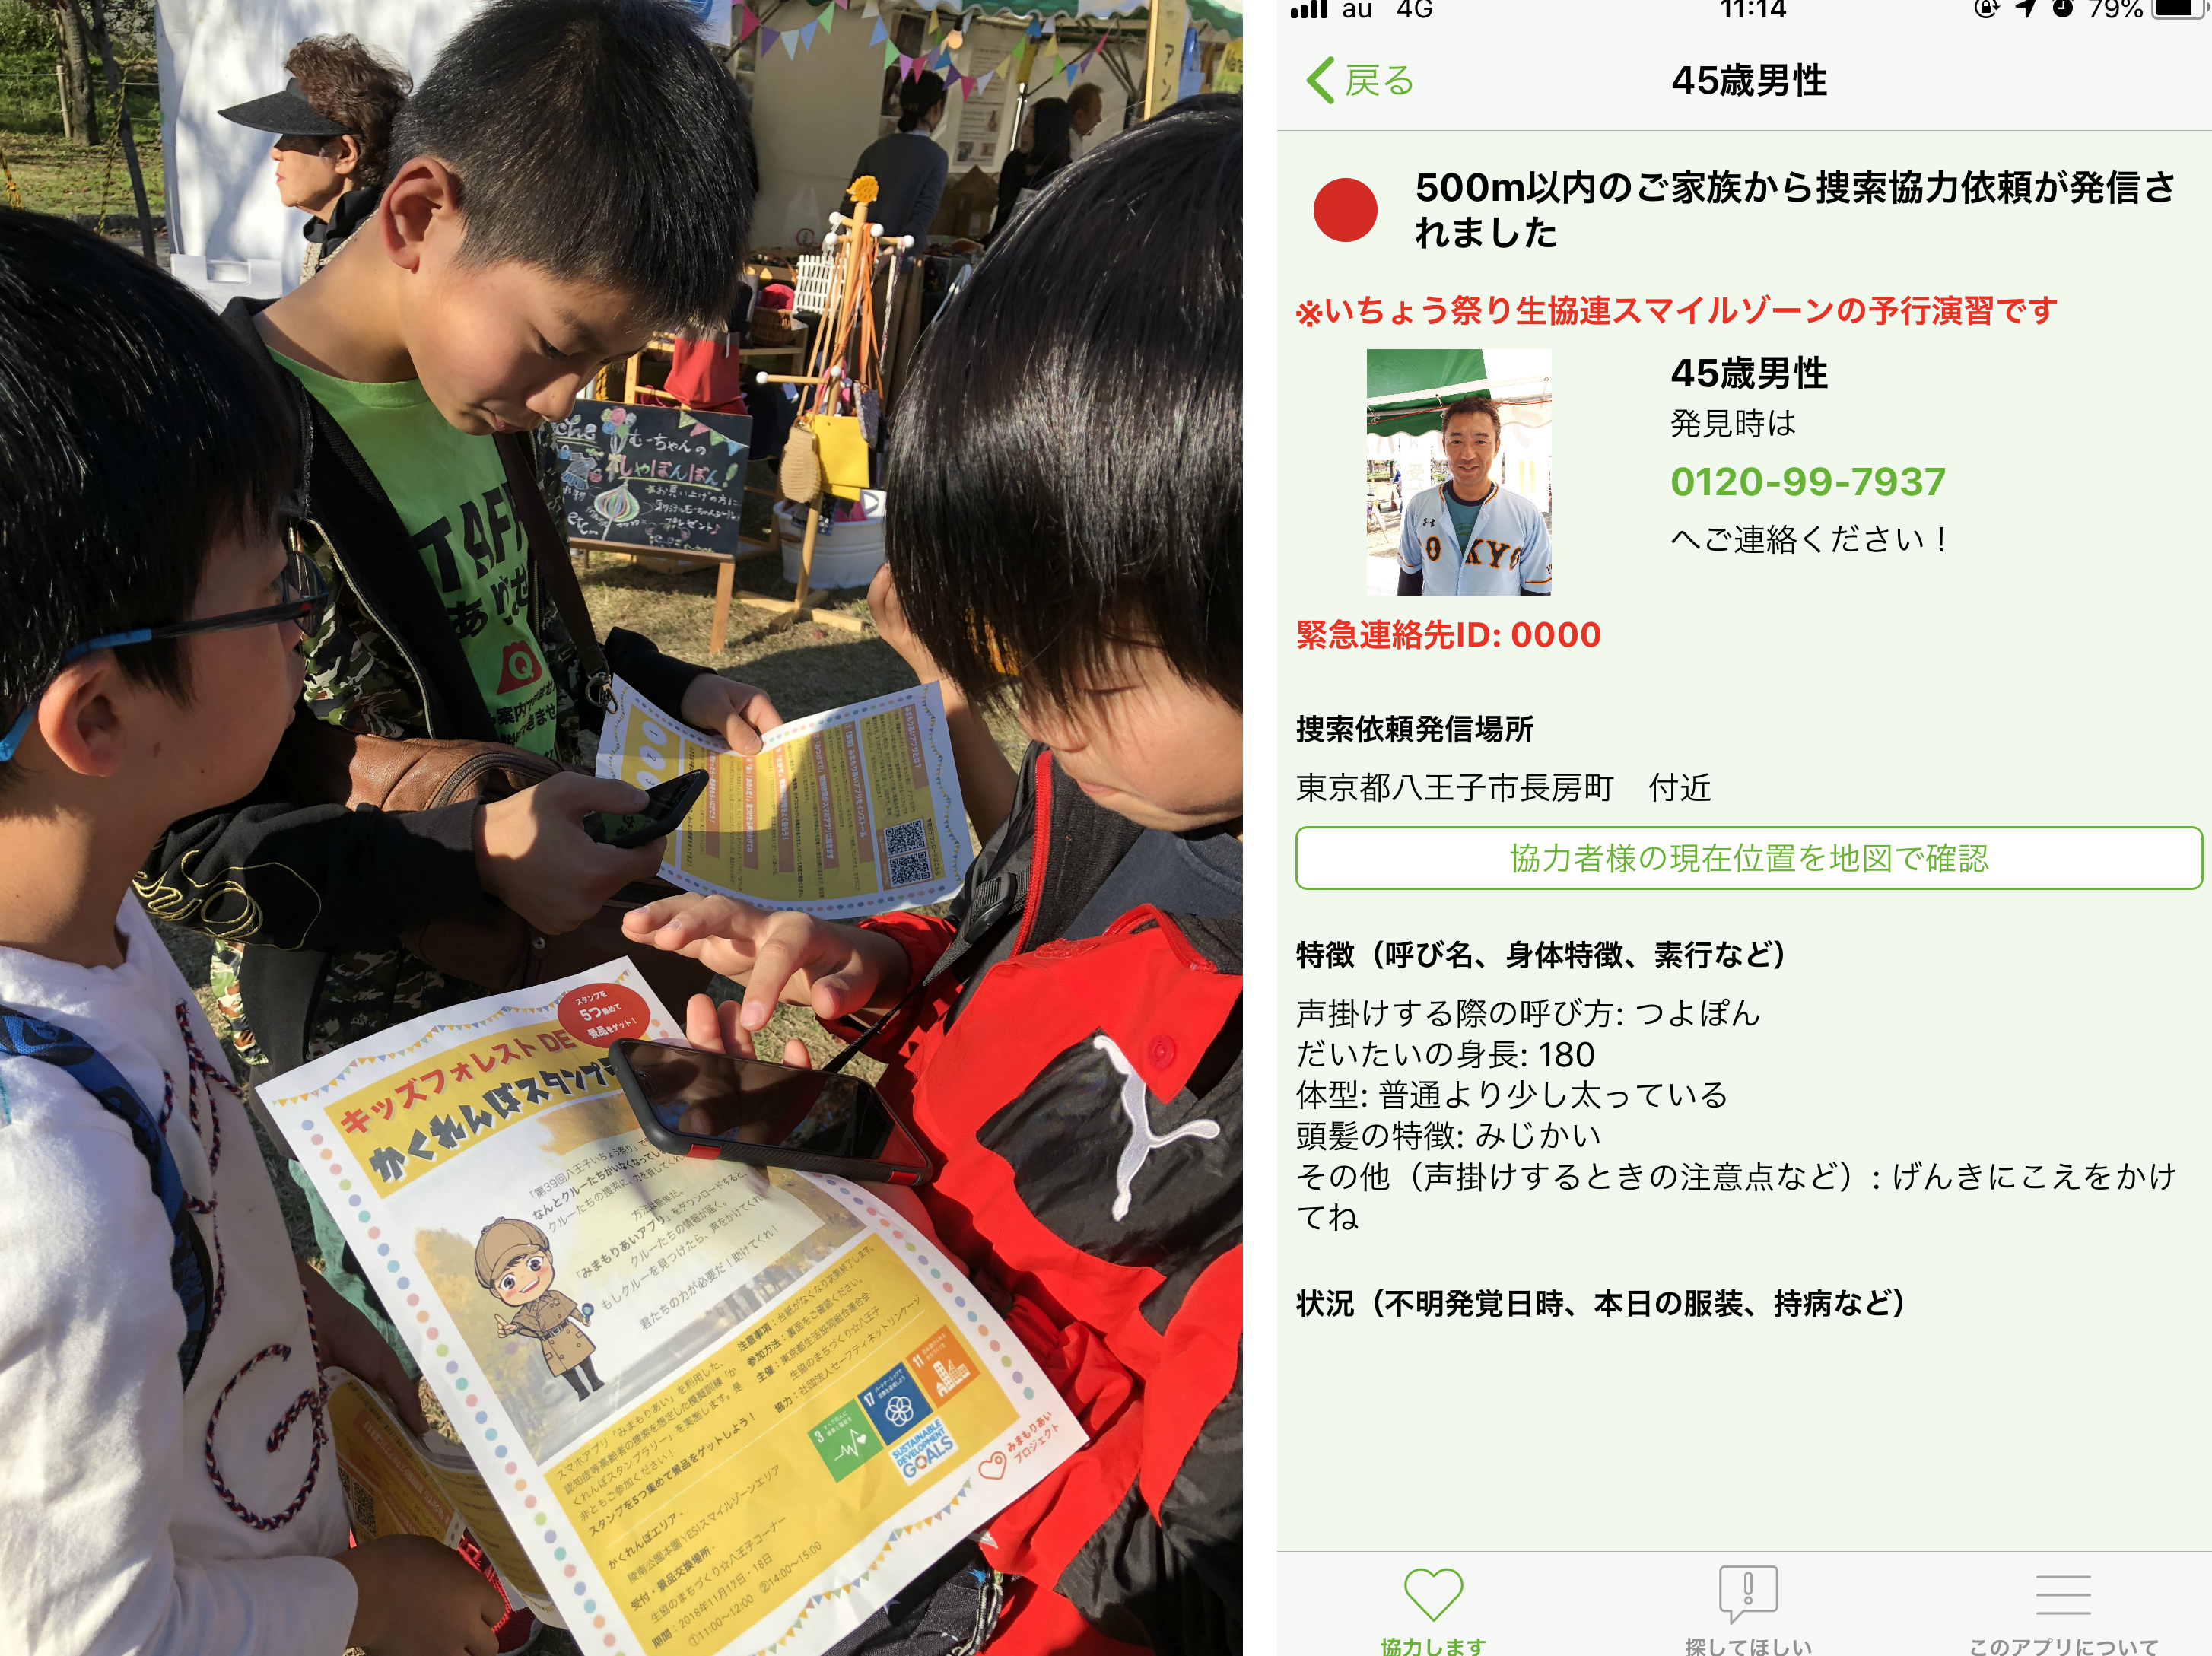 Hide-And-Seek Game using a smartphone app at The 39th Hachioji Ginkgo Festival